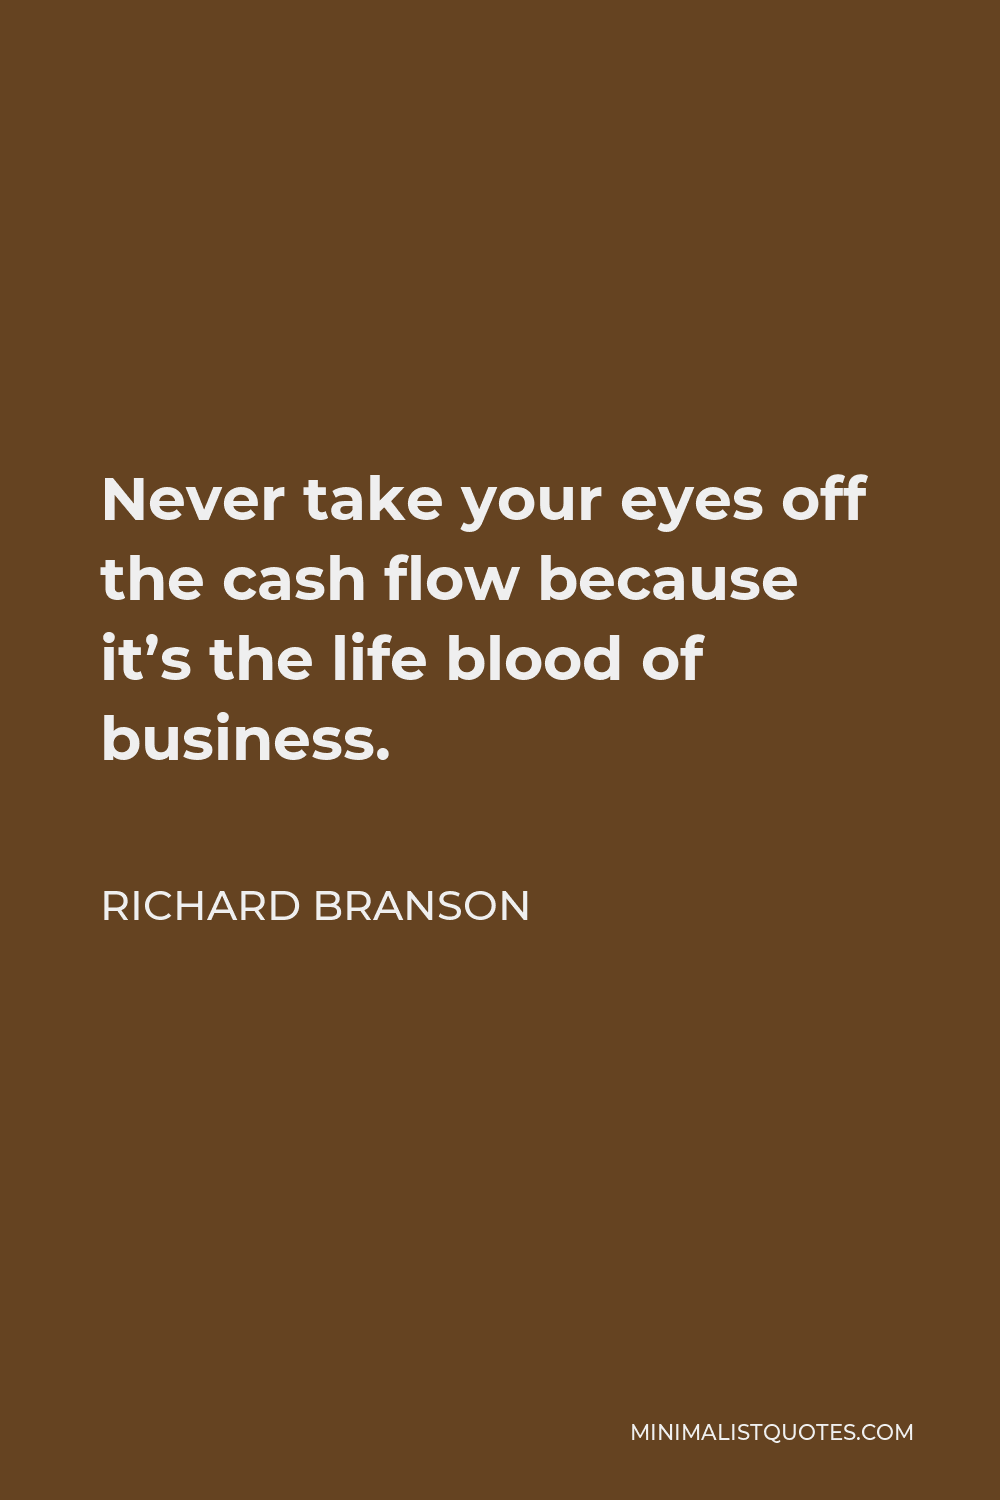 Richard Branson Quote - Never take your eyes off the cash flow because it’s the life blood of business.